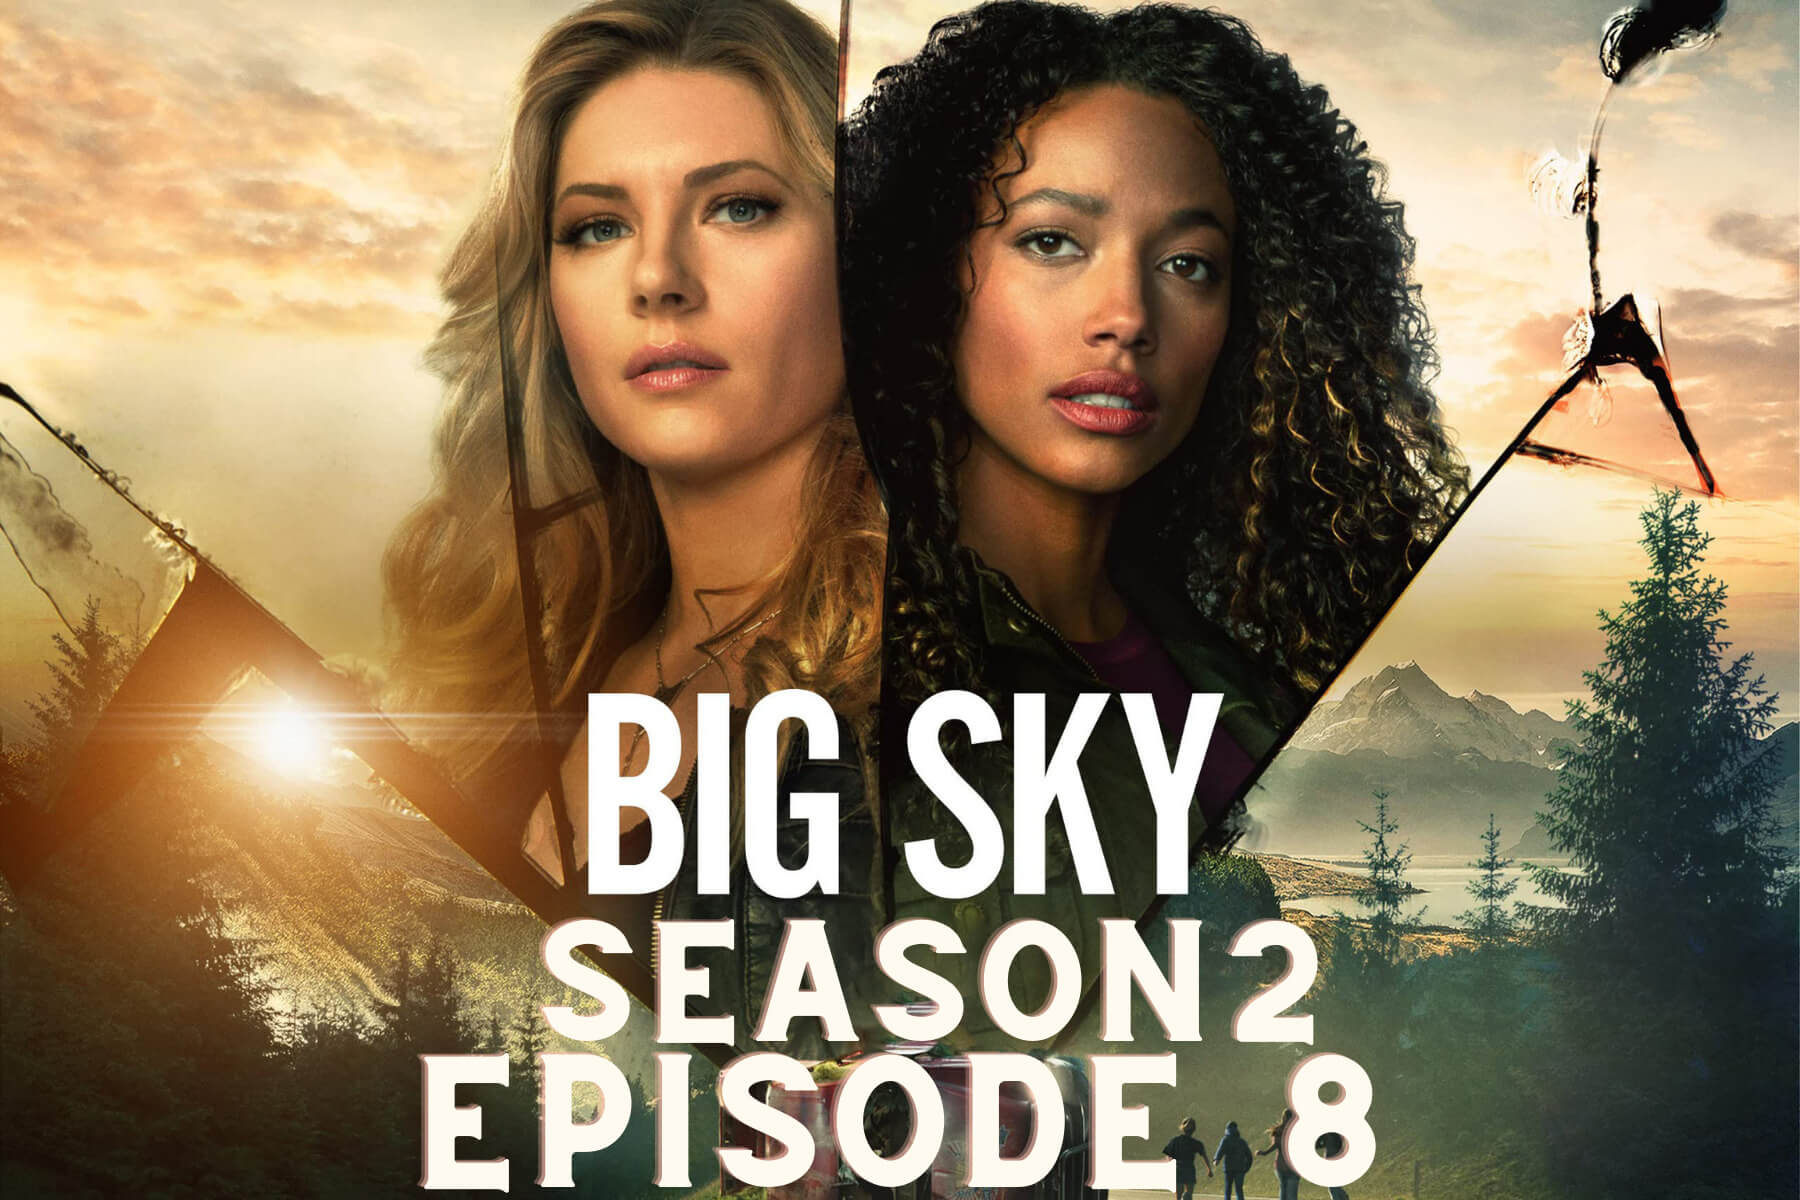 Is There Any News Big Sky Season 2 Episode 8 Trailer?